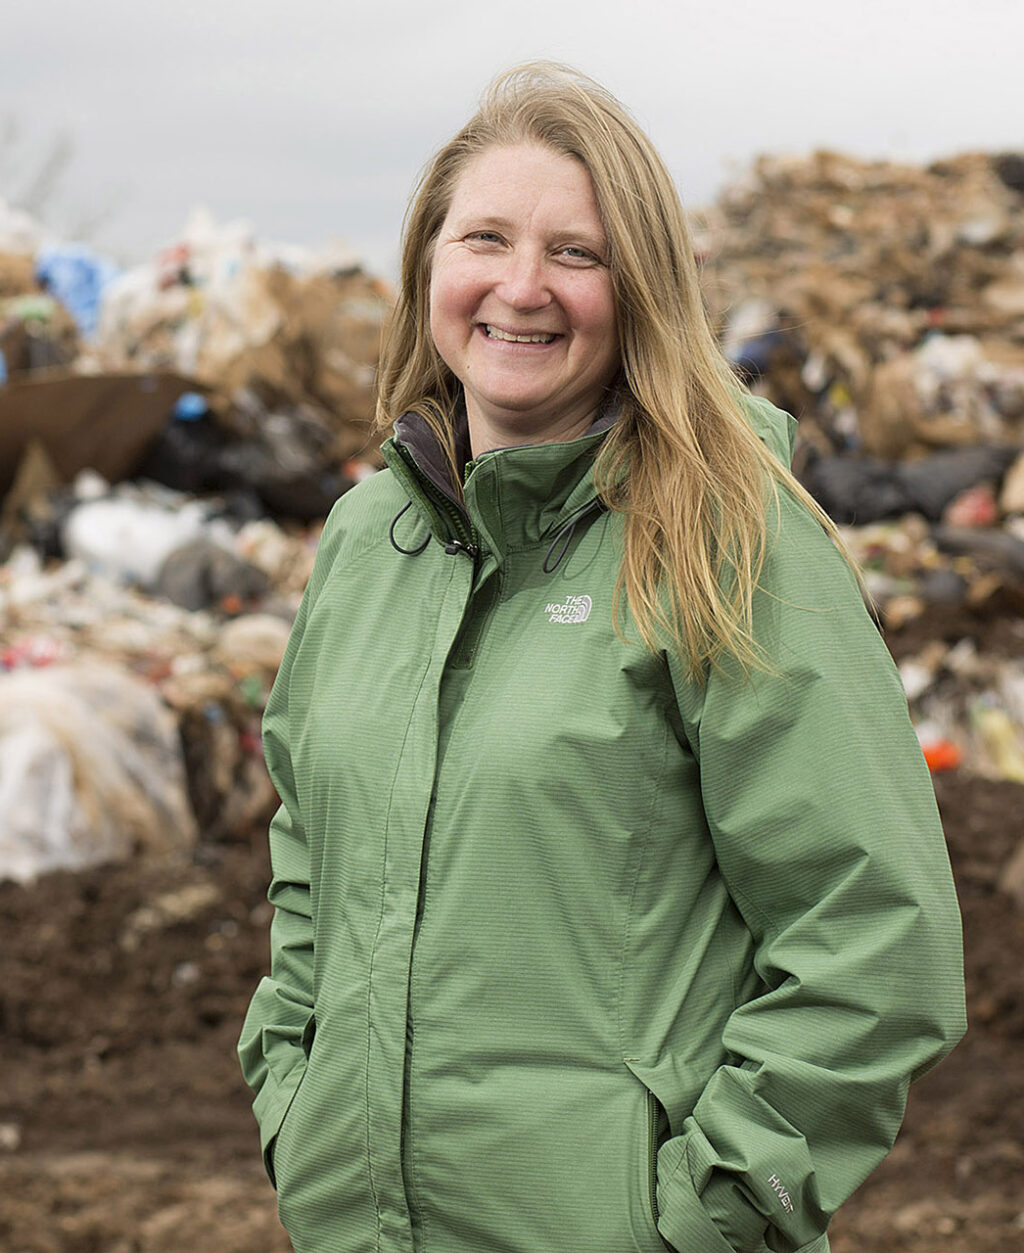 Jenna Jambeck Portrait of Assistant Professor of Environmental Engineering Jenna Jambeck with trash and debris behind her on site at the Athens Clarke County Landfill. Date of Photo: 3/4/2015 Credit: Andrew Davis Tucker, University of Georgia Photographic Services File: 32520-039 The University of Georgia owns the rights to this image or has permission to redistribute this image. Permission to use this image is granted for internal UGA publications and promotions and for a one-time use for news purposes. Separate permission and payment of a fee is required to use any image for any other purpose, including but not limited to, commercial, advertising or illustrative purposes. Unauthorized use of any of these copyrighted photographs is unlawful and may subject the user to civil and criminal penalties. Possession of this image signifies agreement to all the terms described above.